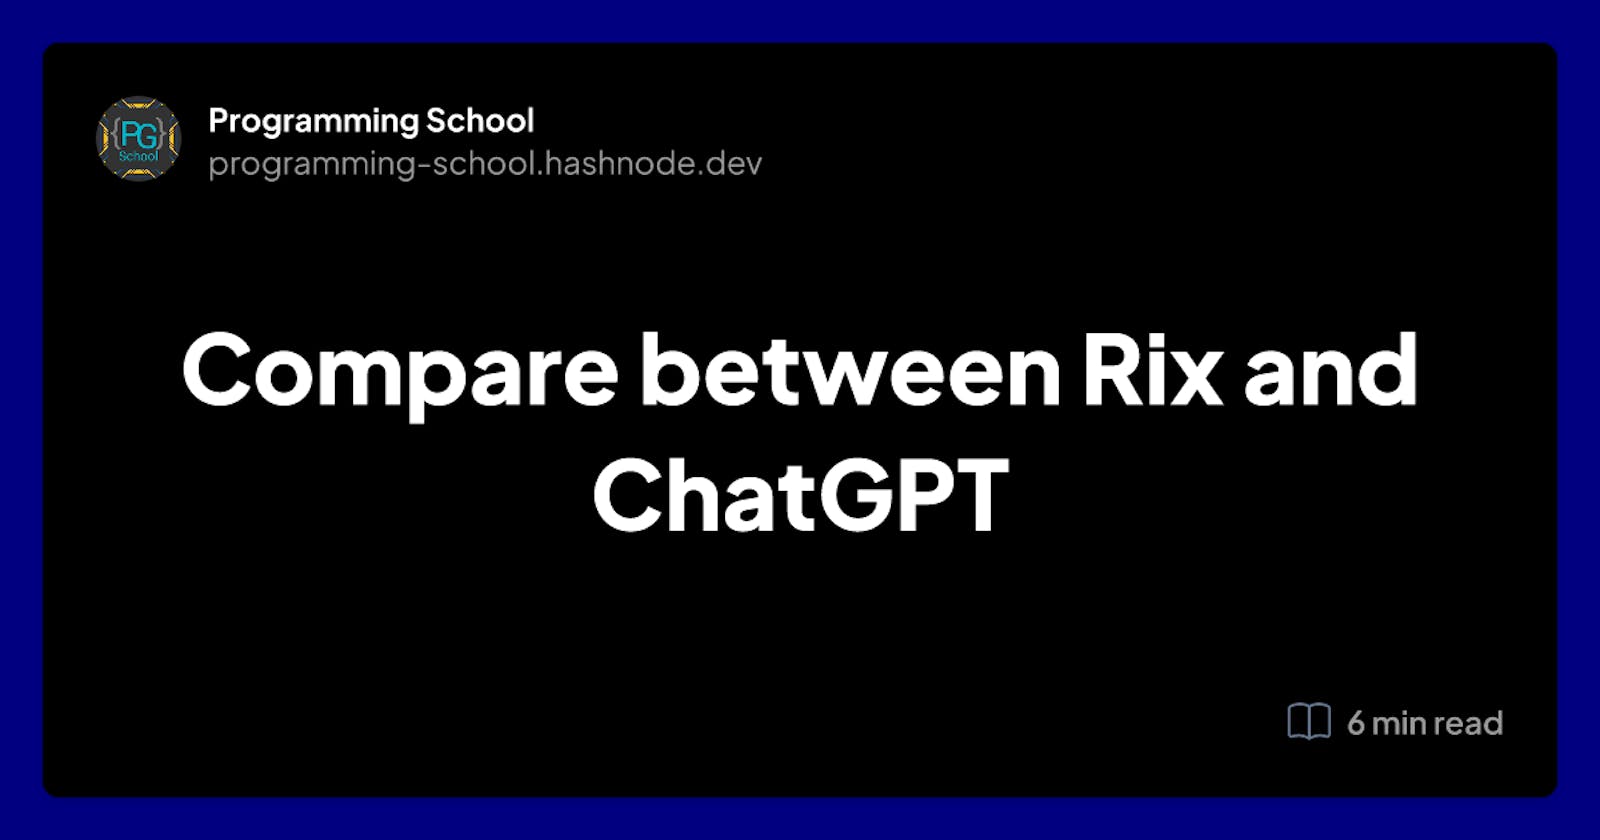 Compare between Rix and ChatGPT